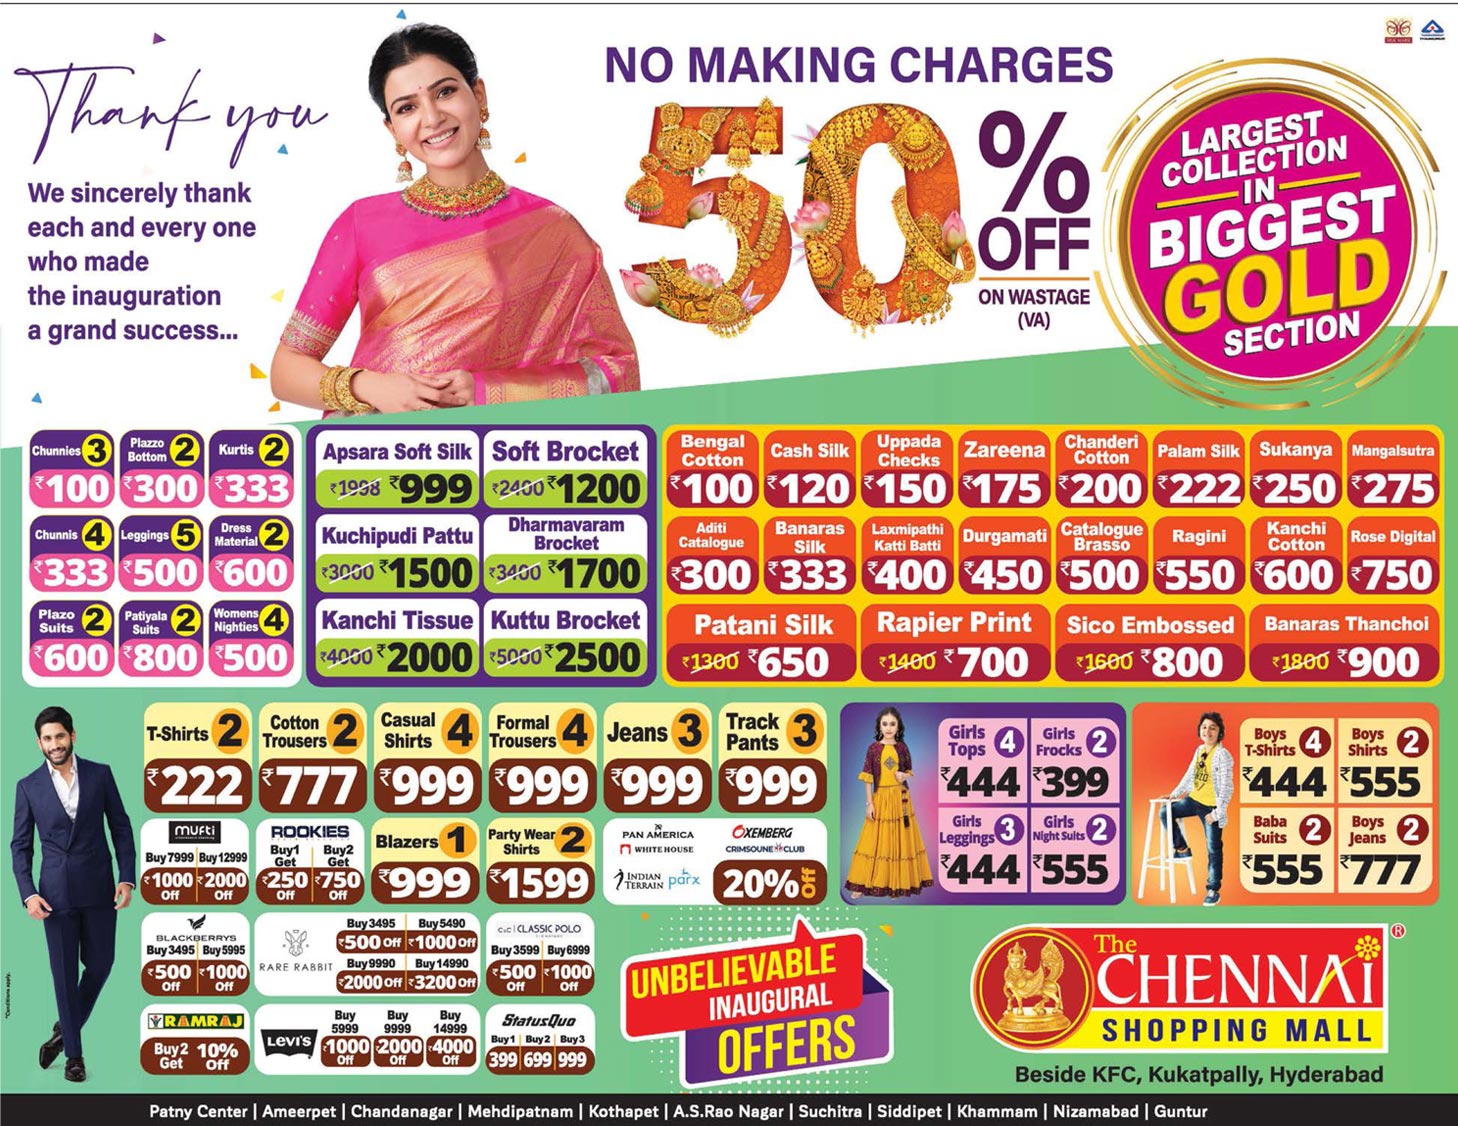 the-chennai-shopping-mall-no-making-charges-50%-off-ad-deccan-chronicle-hyderabad-20-06-2021